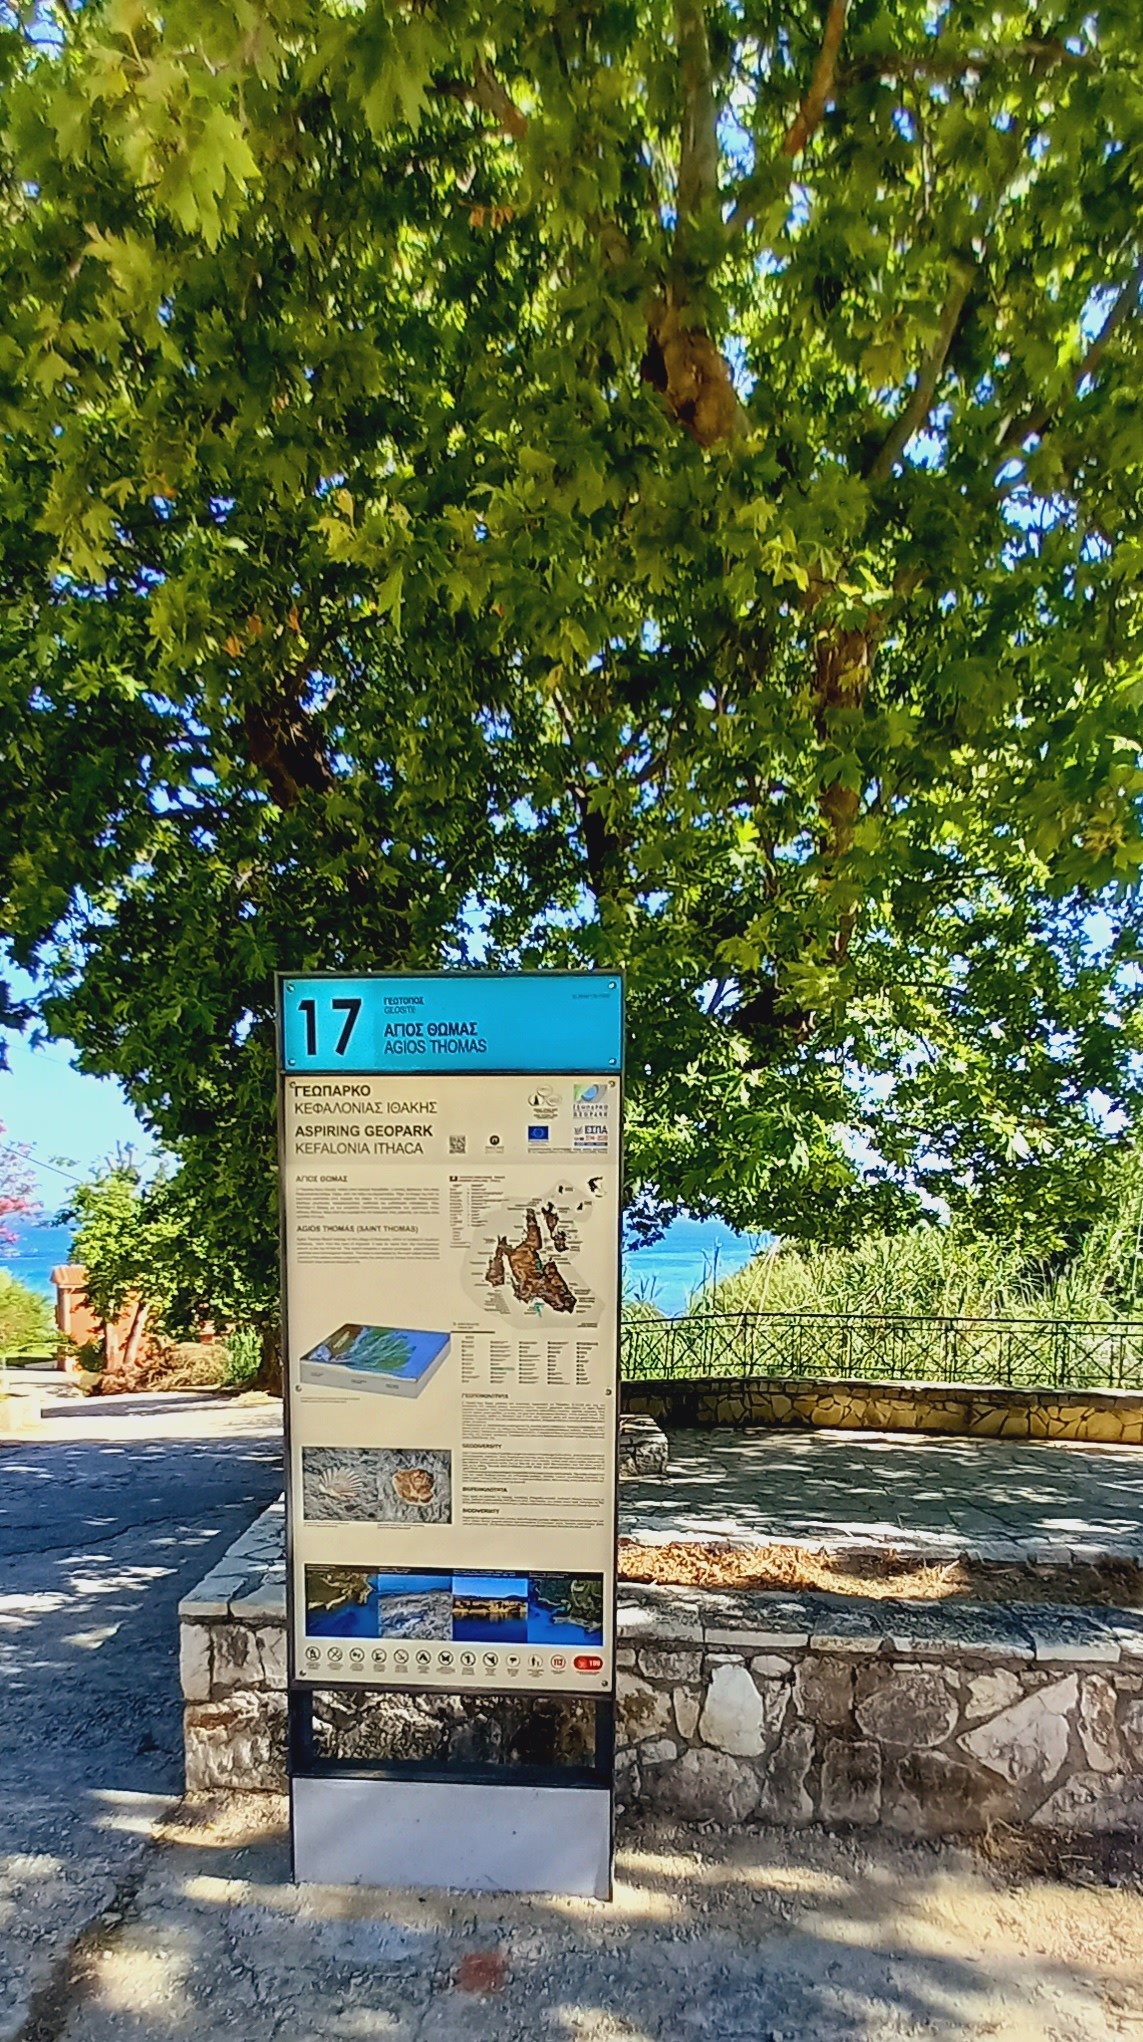 Info-panel placed at Agios Thomas Geosite